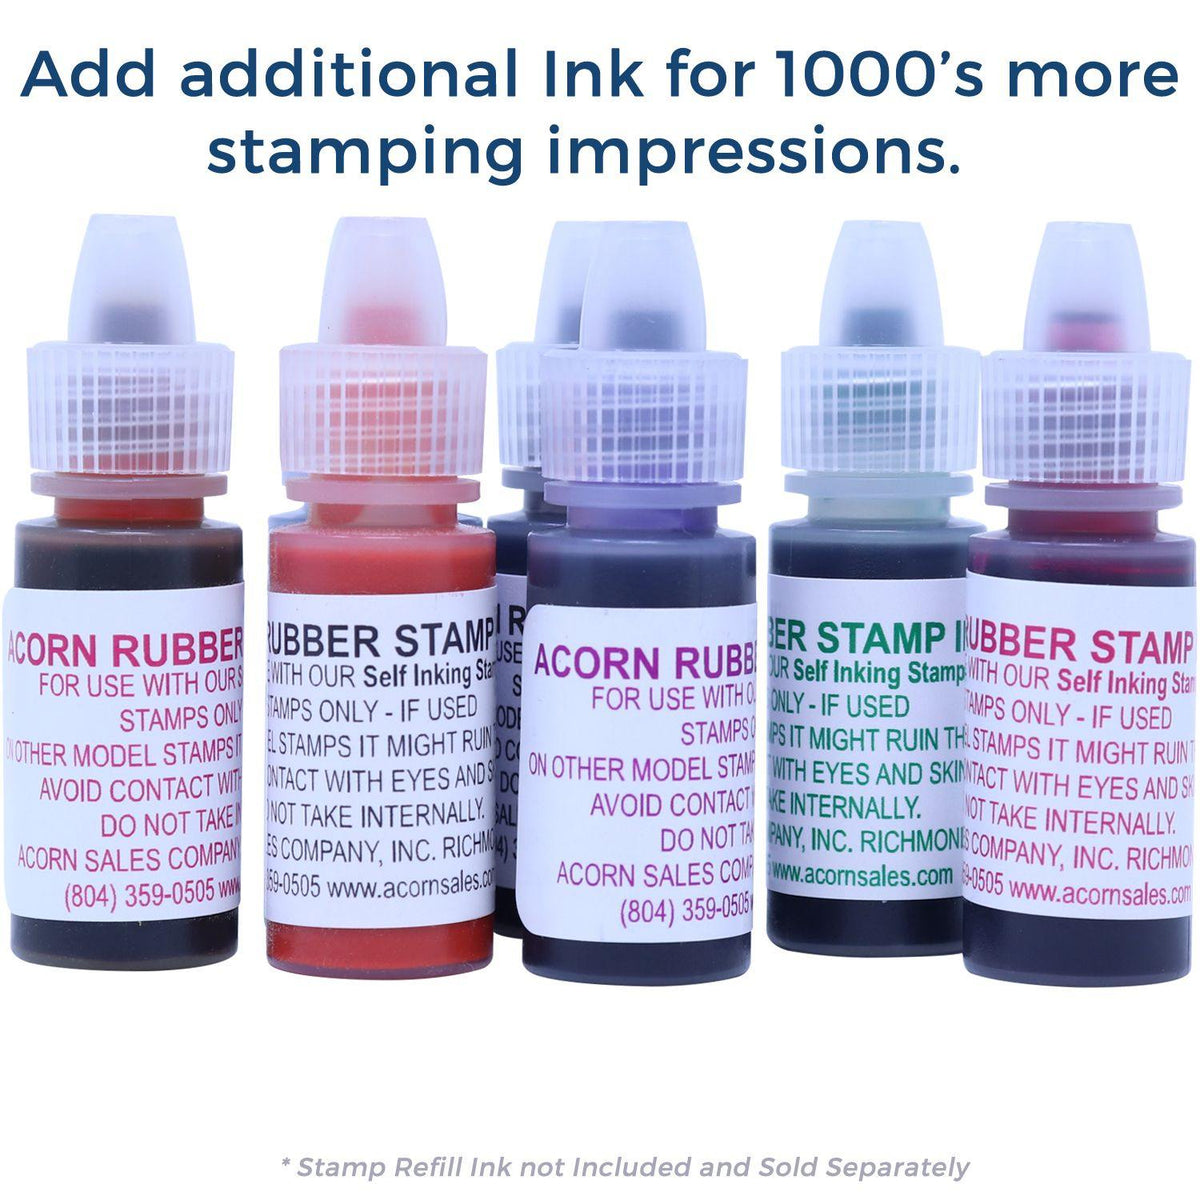 Refill Inks for Large Pre-Inked Copy with Letter Stamp Available